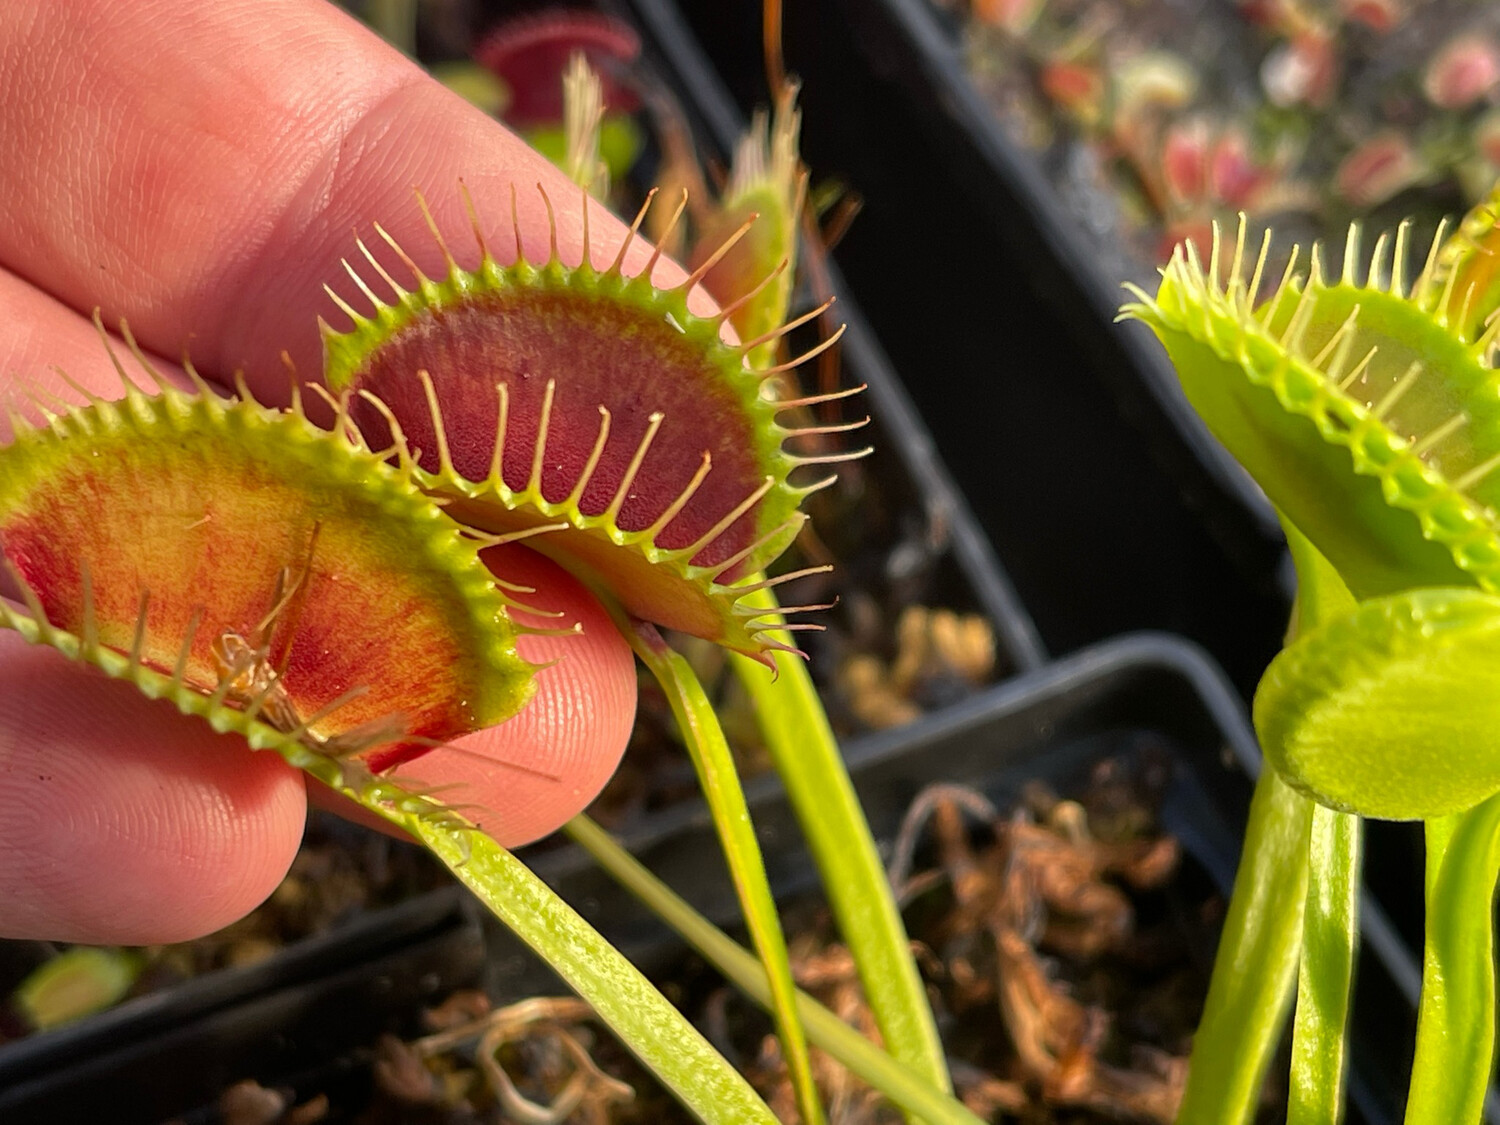 Dionaea muscipula “Dirk Venthums Giant” Venus Flytrap (small) Very Limited! 